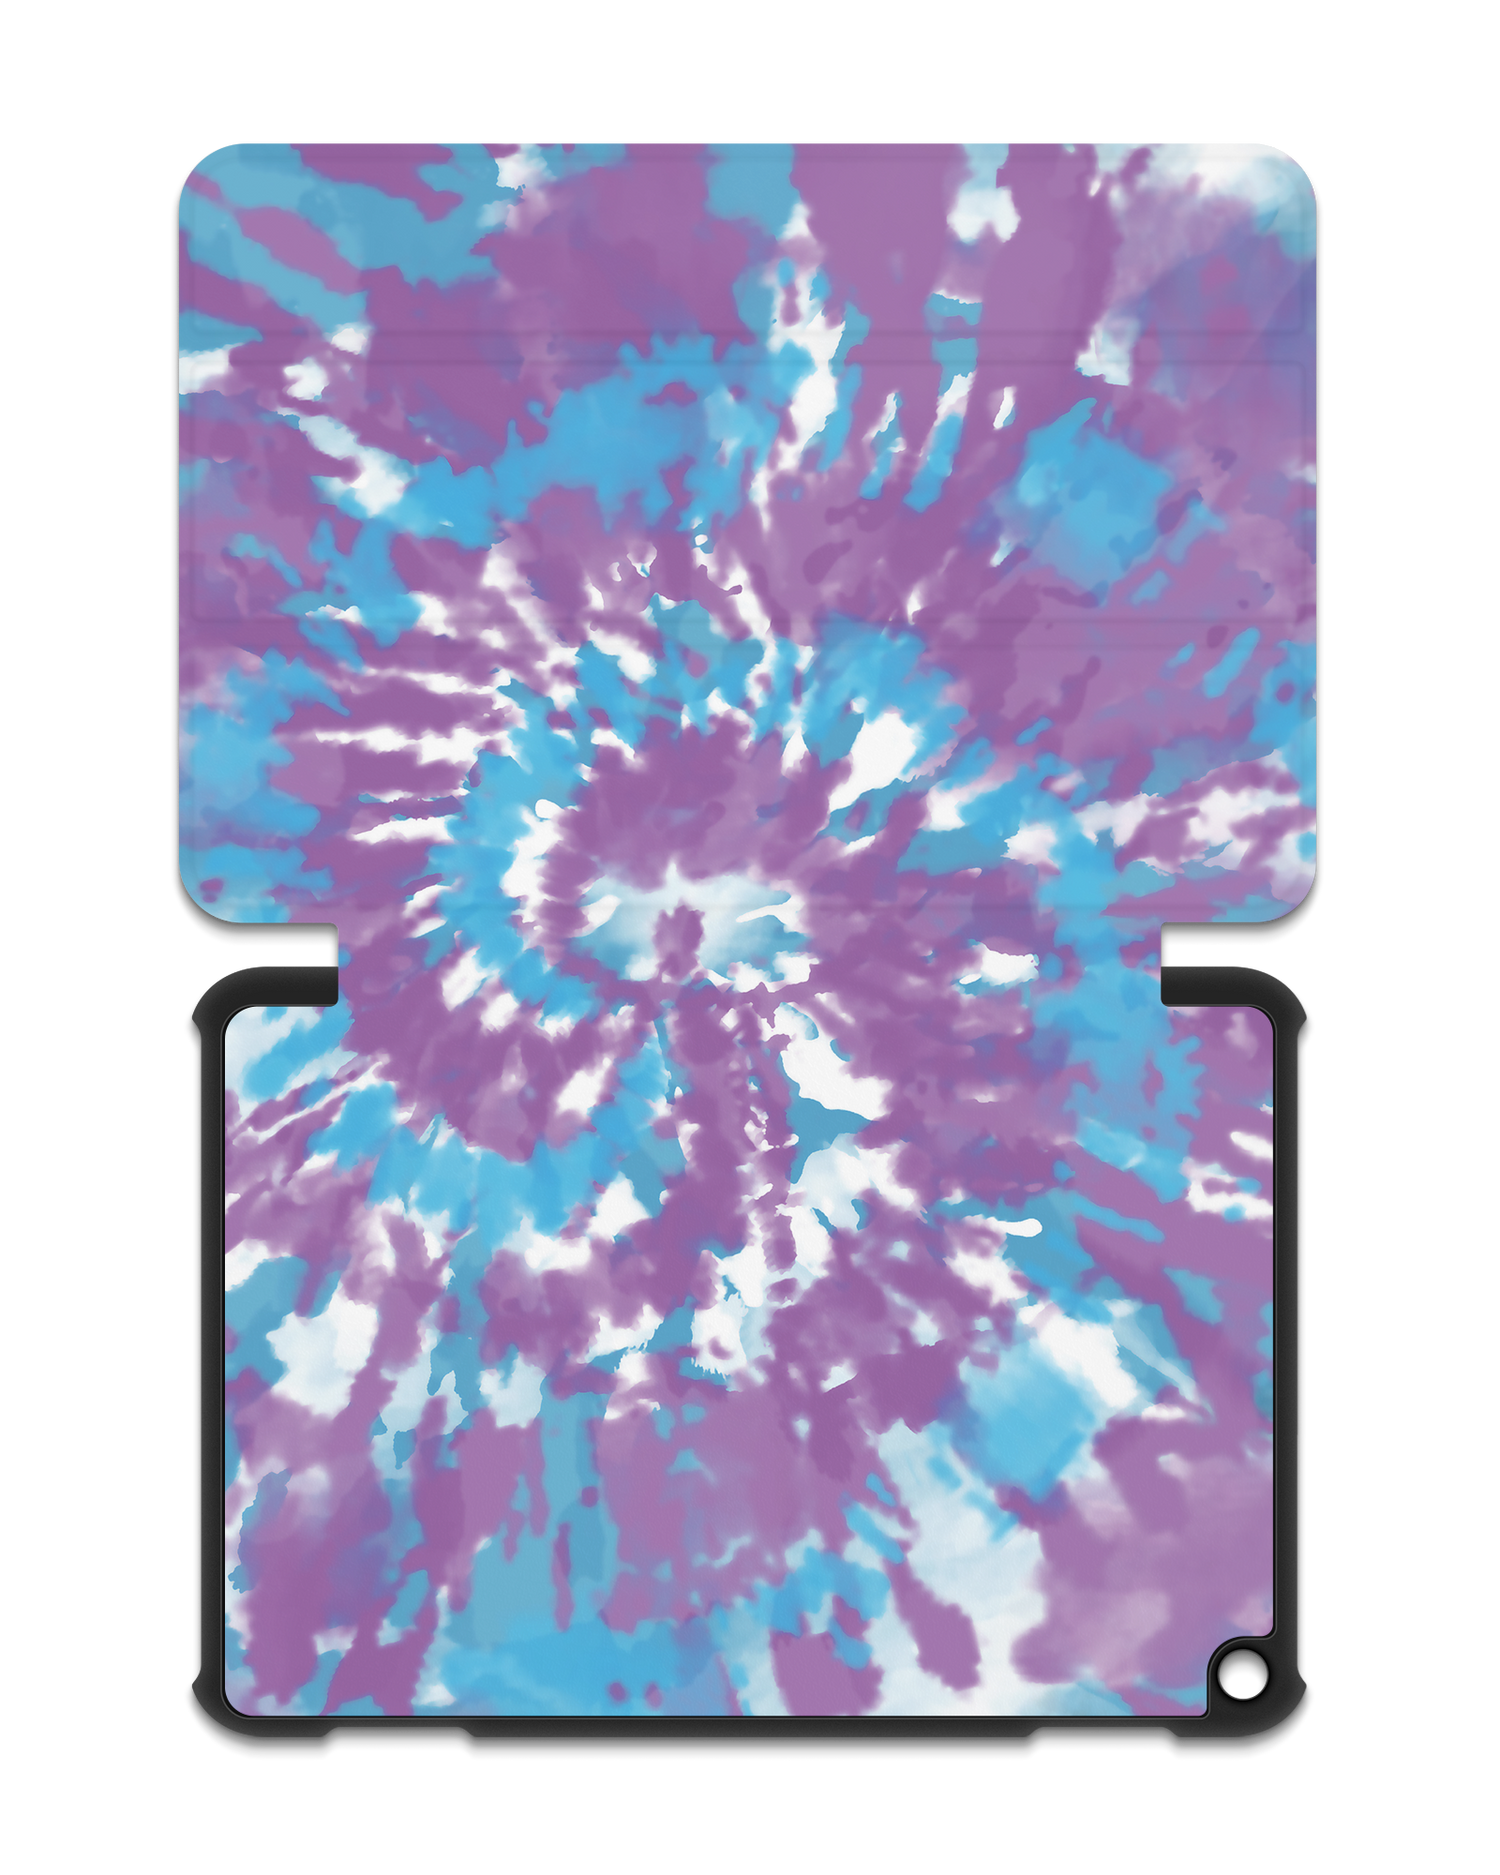 Classic Tie Dye Tablet Smart Case for Amazon Fire HD 8 (2022), Amazon Fire HD 8 Plus (2022), Amazon Fire HD 8 (2020), Amazon Fire HD 8 Plus (2020): Opened